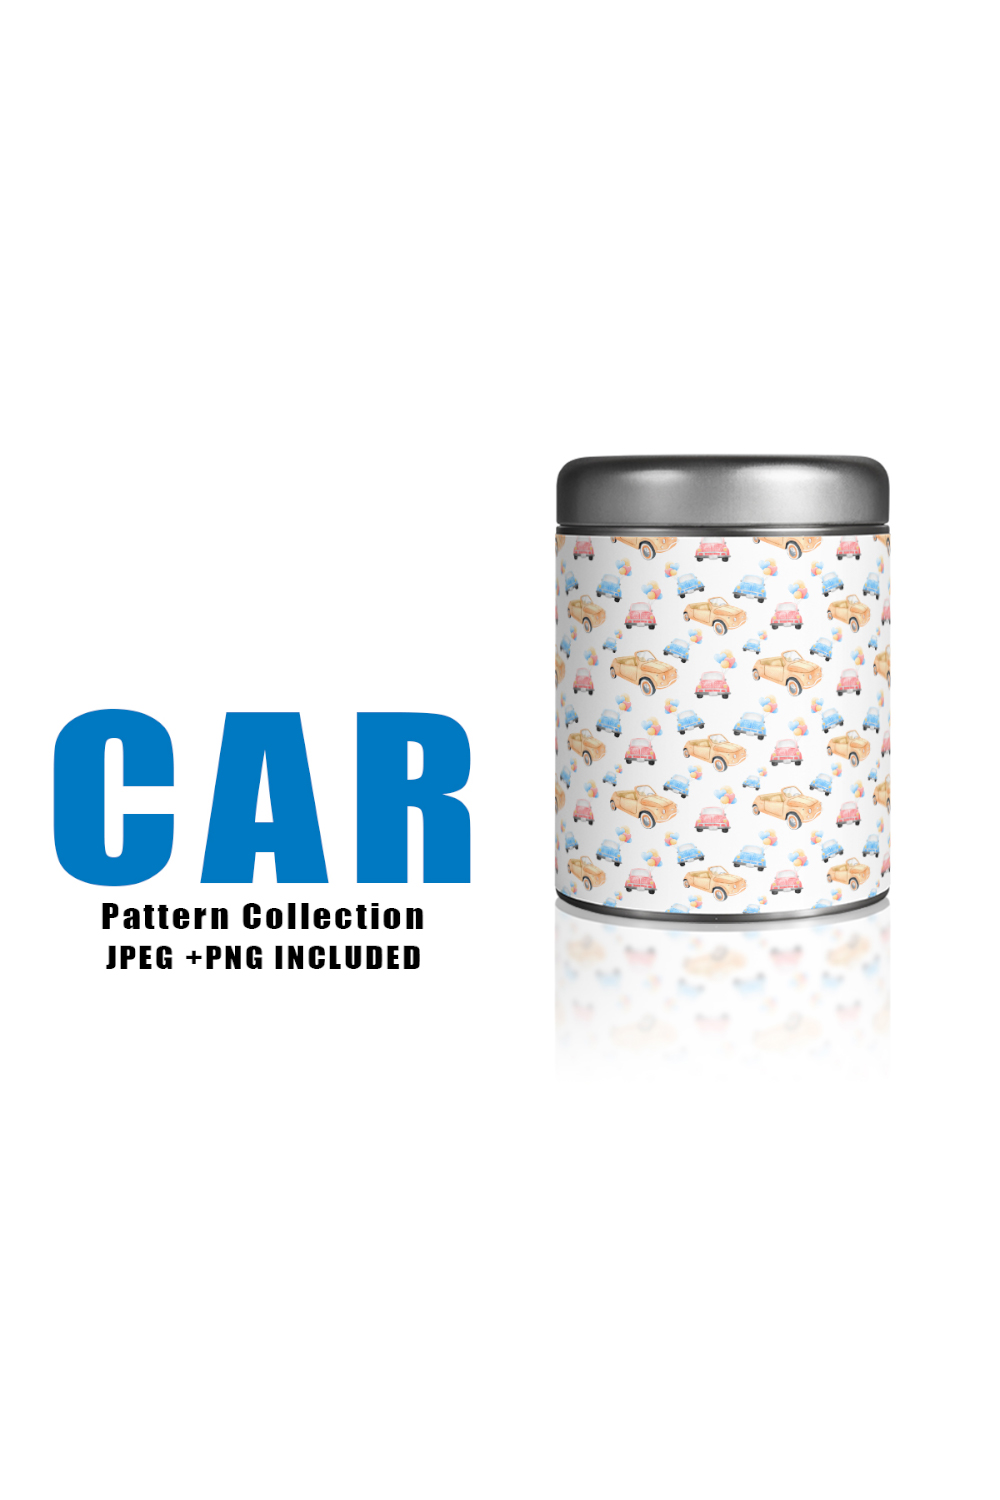 Image of a jar with colorful car patterns